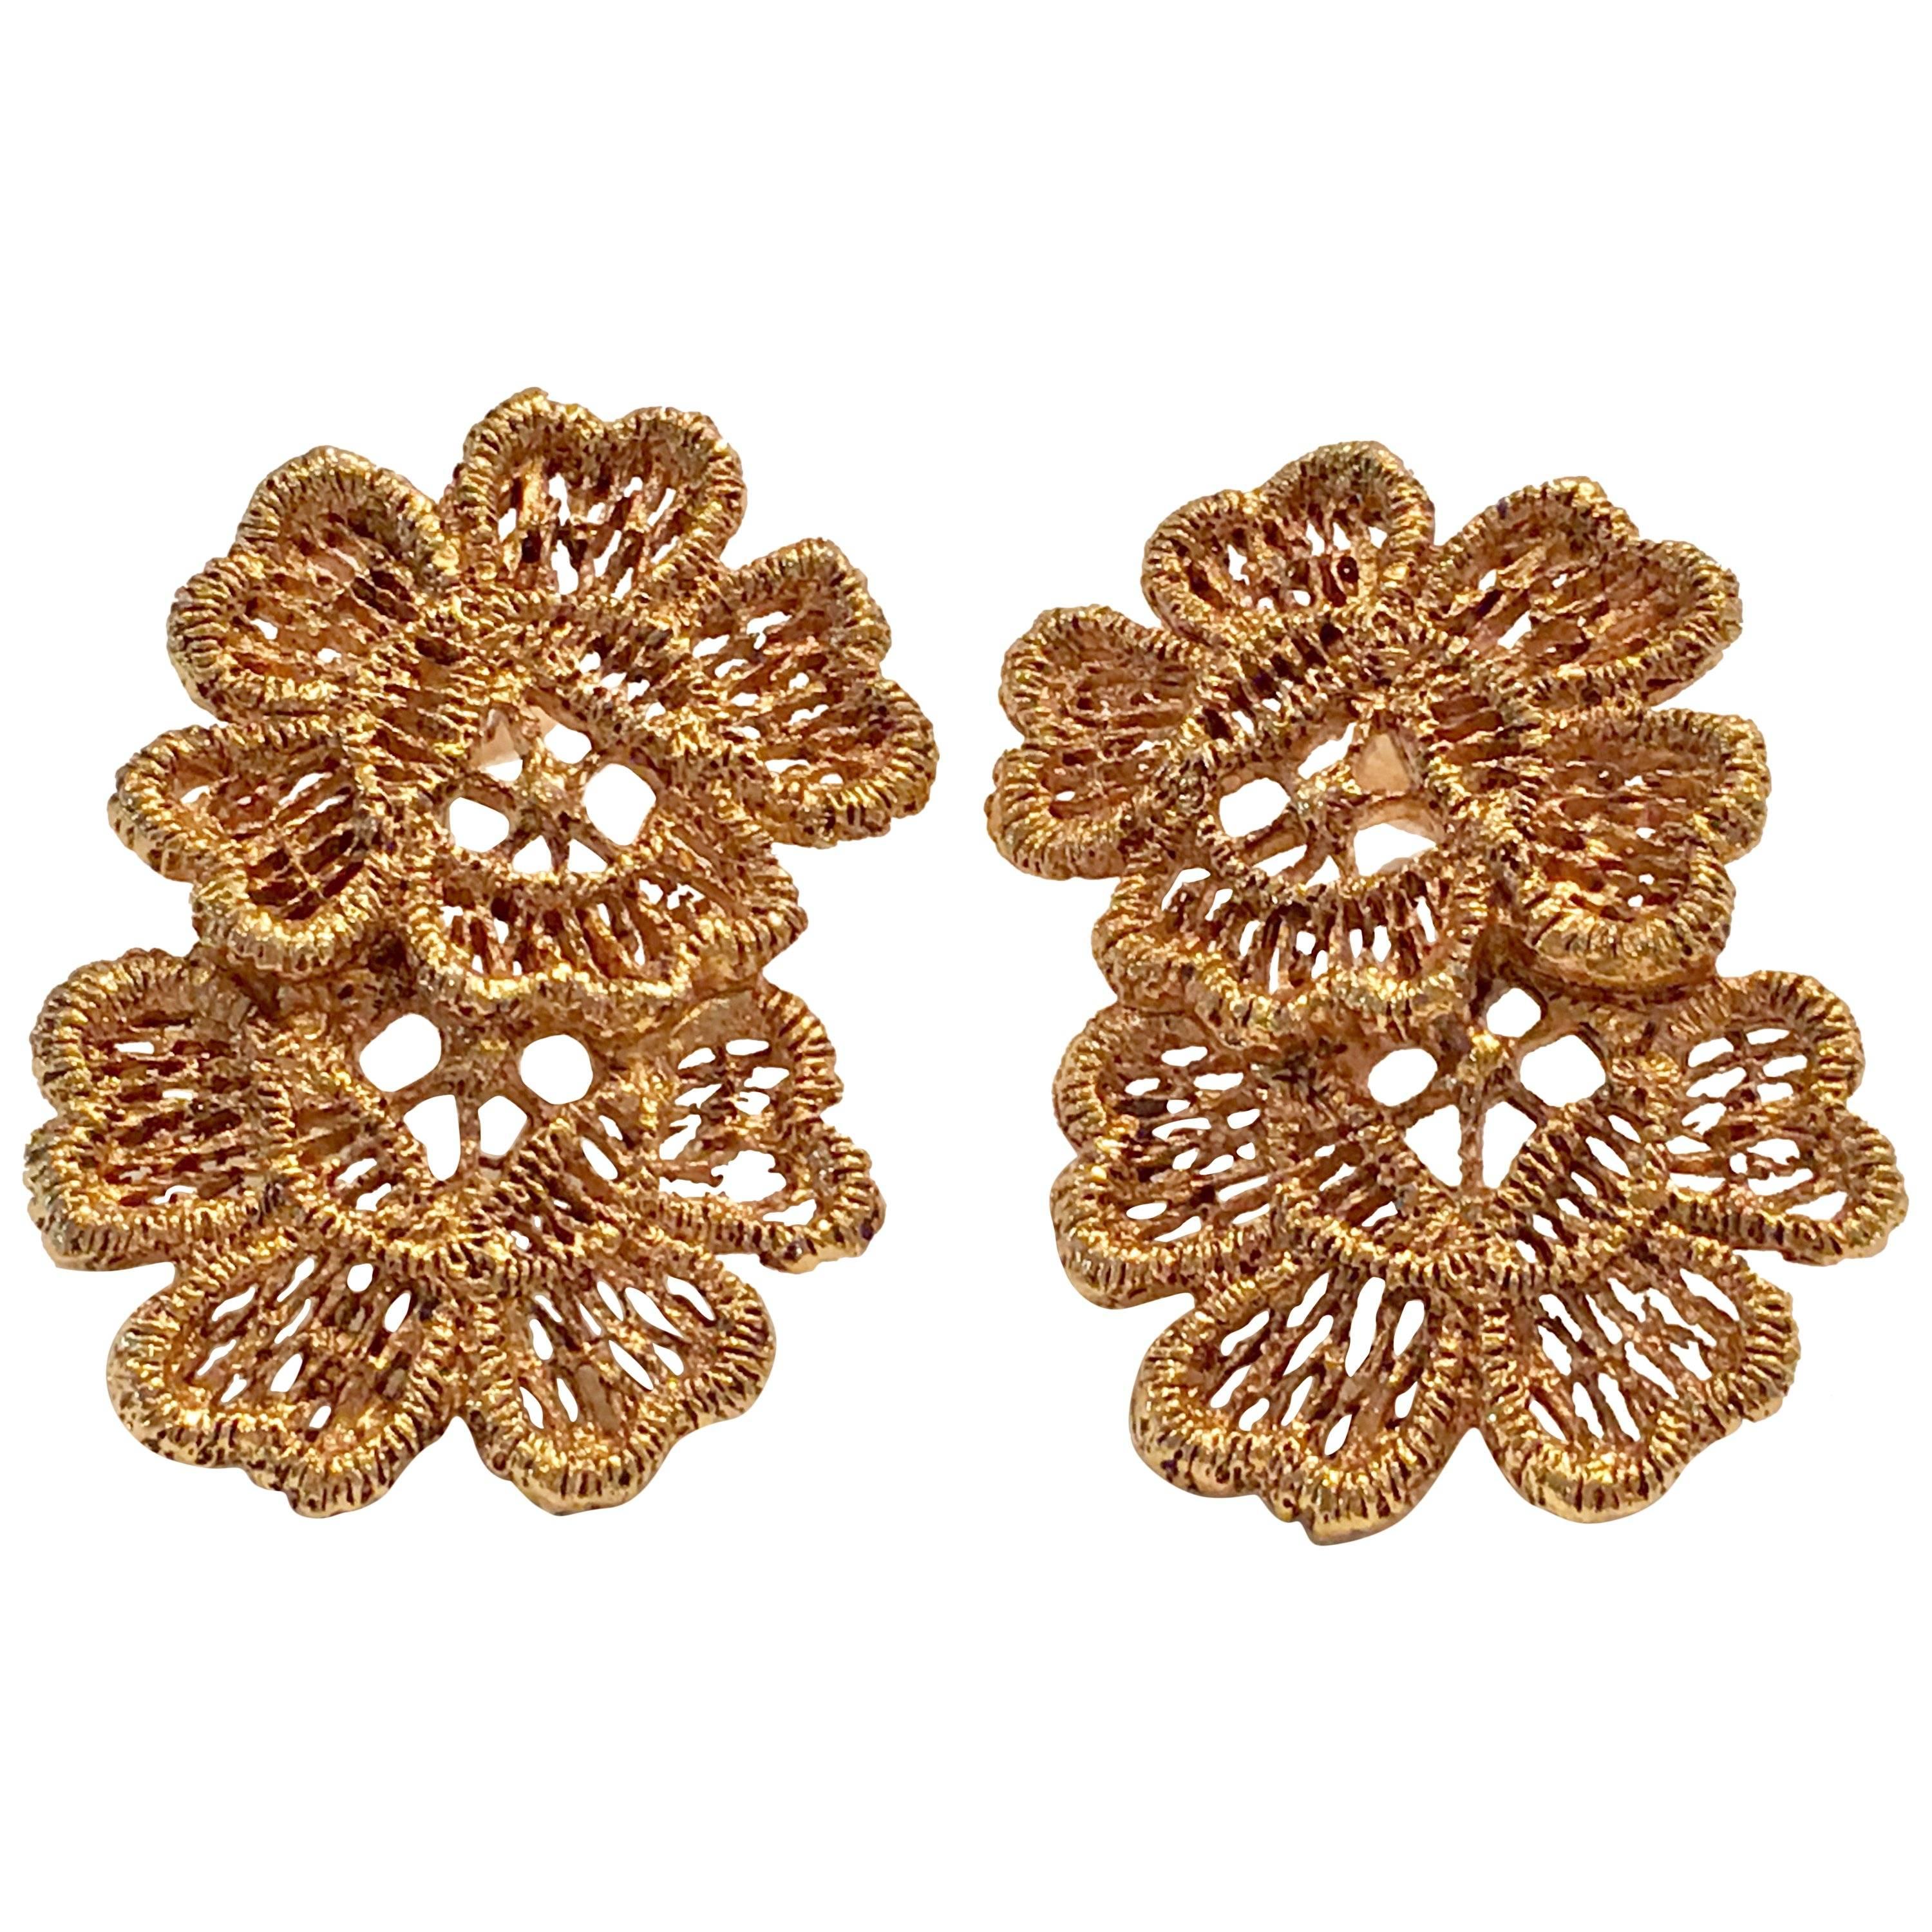 70'S Gold Plate Double Flower Earrings By, Carol Dauplaise